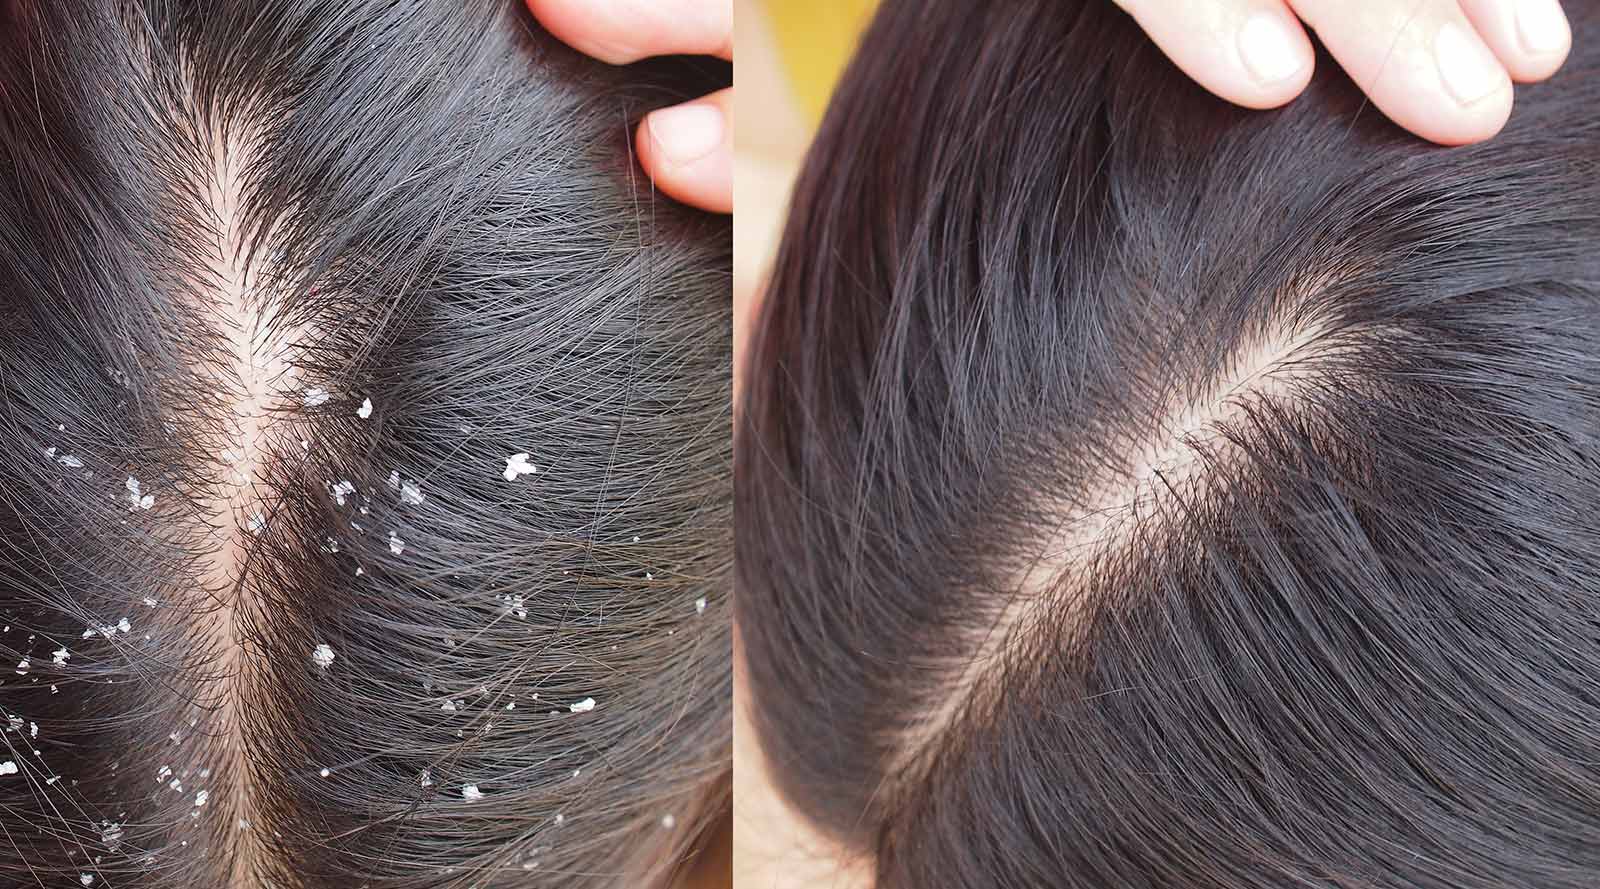 Comparison of two images side by side: On the left, a woman's scalp and hair with visible dandruff. On the right, the same woman's scalp and hair without any visible dandruff.